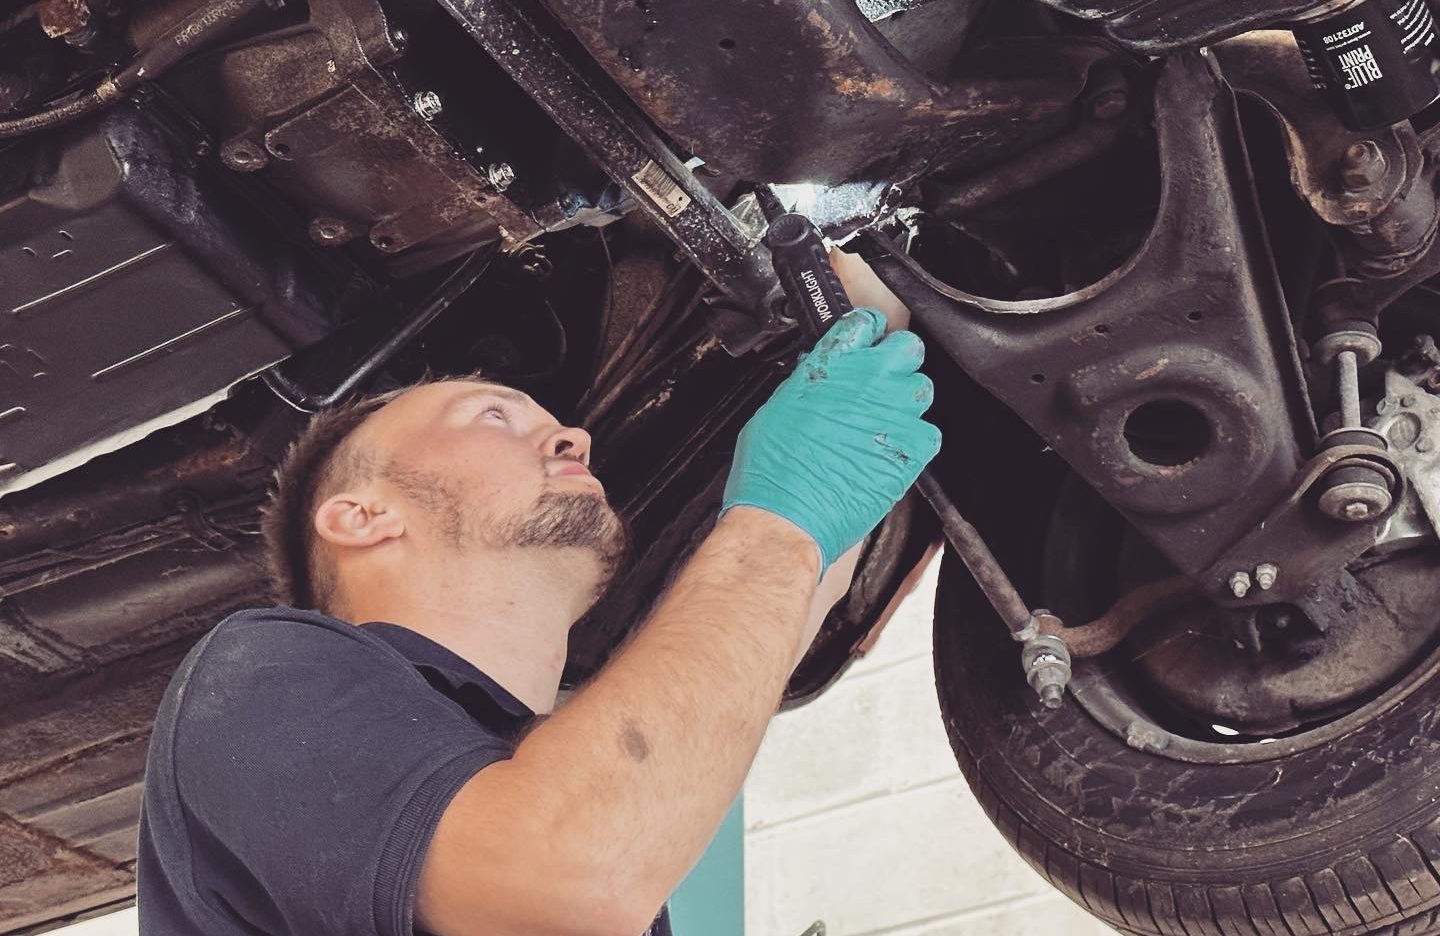 A mechanic is attentively working underneath a vehicle, suspended on a lift, at Coastal Motorsport a garage in North Walsham. Wearing dark work attire paired with bright teal gloves, he's engaged in adjusting or inspecting the vehicle's underbody, possibly focusing on the suspension system. The image showcases an intricate view of the car’s undercarriage with various mechanical components visible, portraying the precision and expertise required in automotive maintenance.